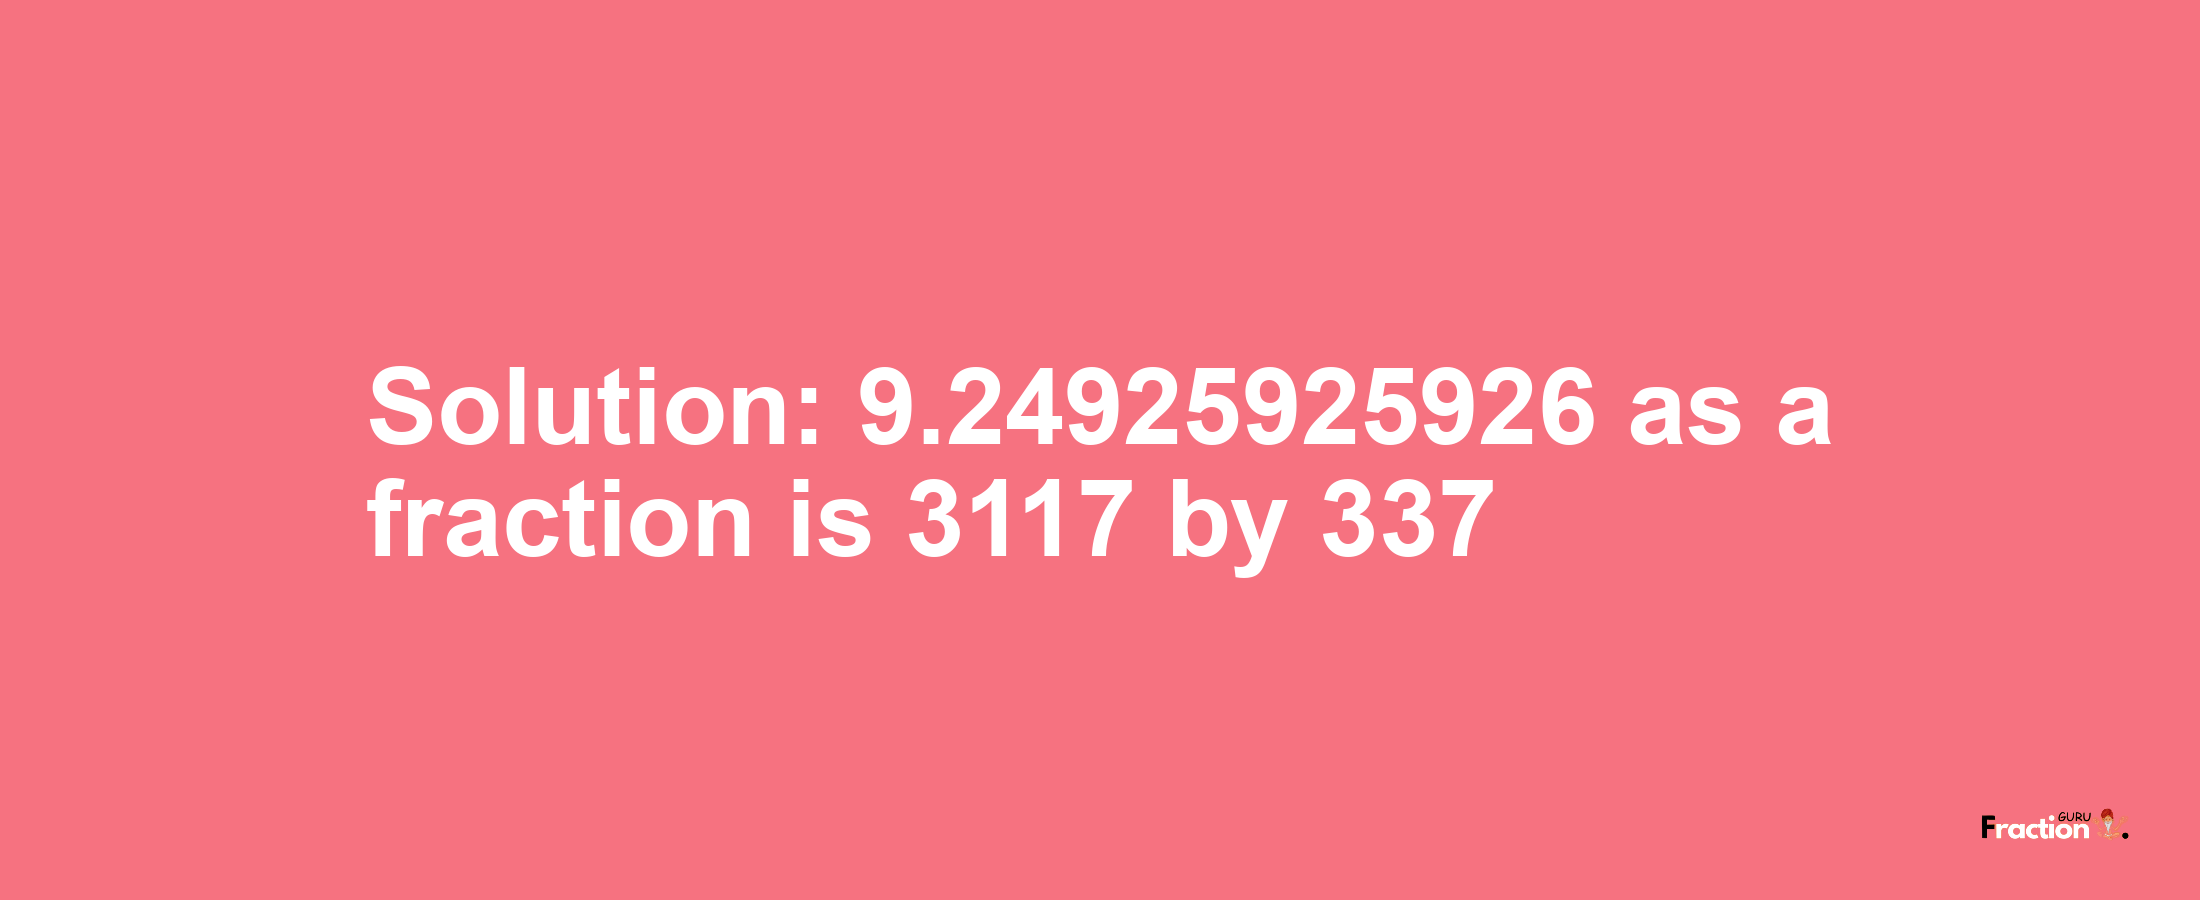 Solution:9.24925925926 as a fraction is 3117/337